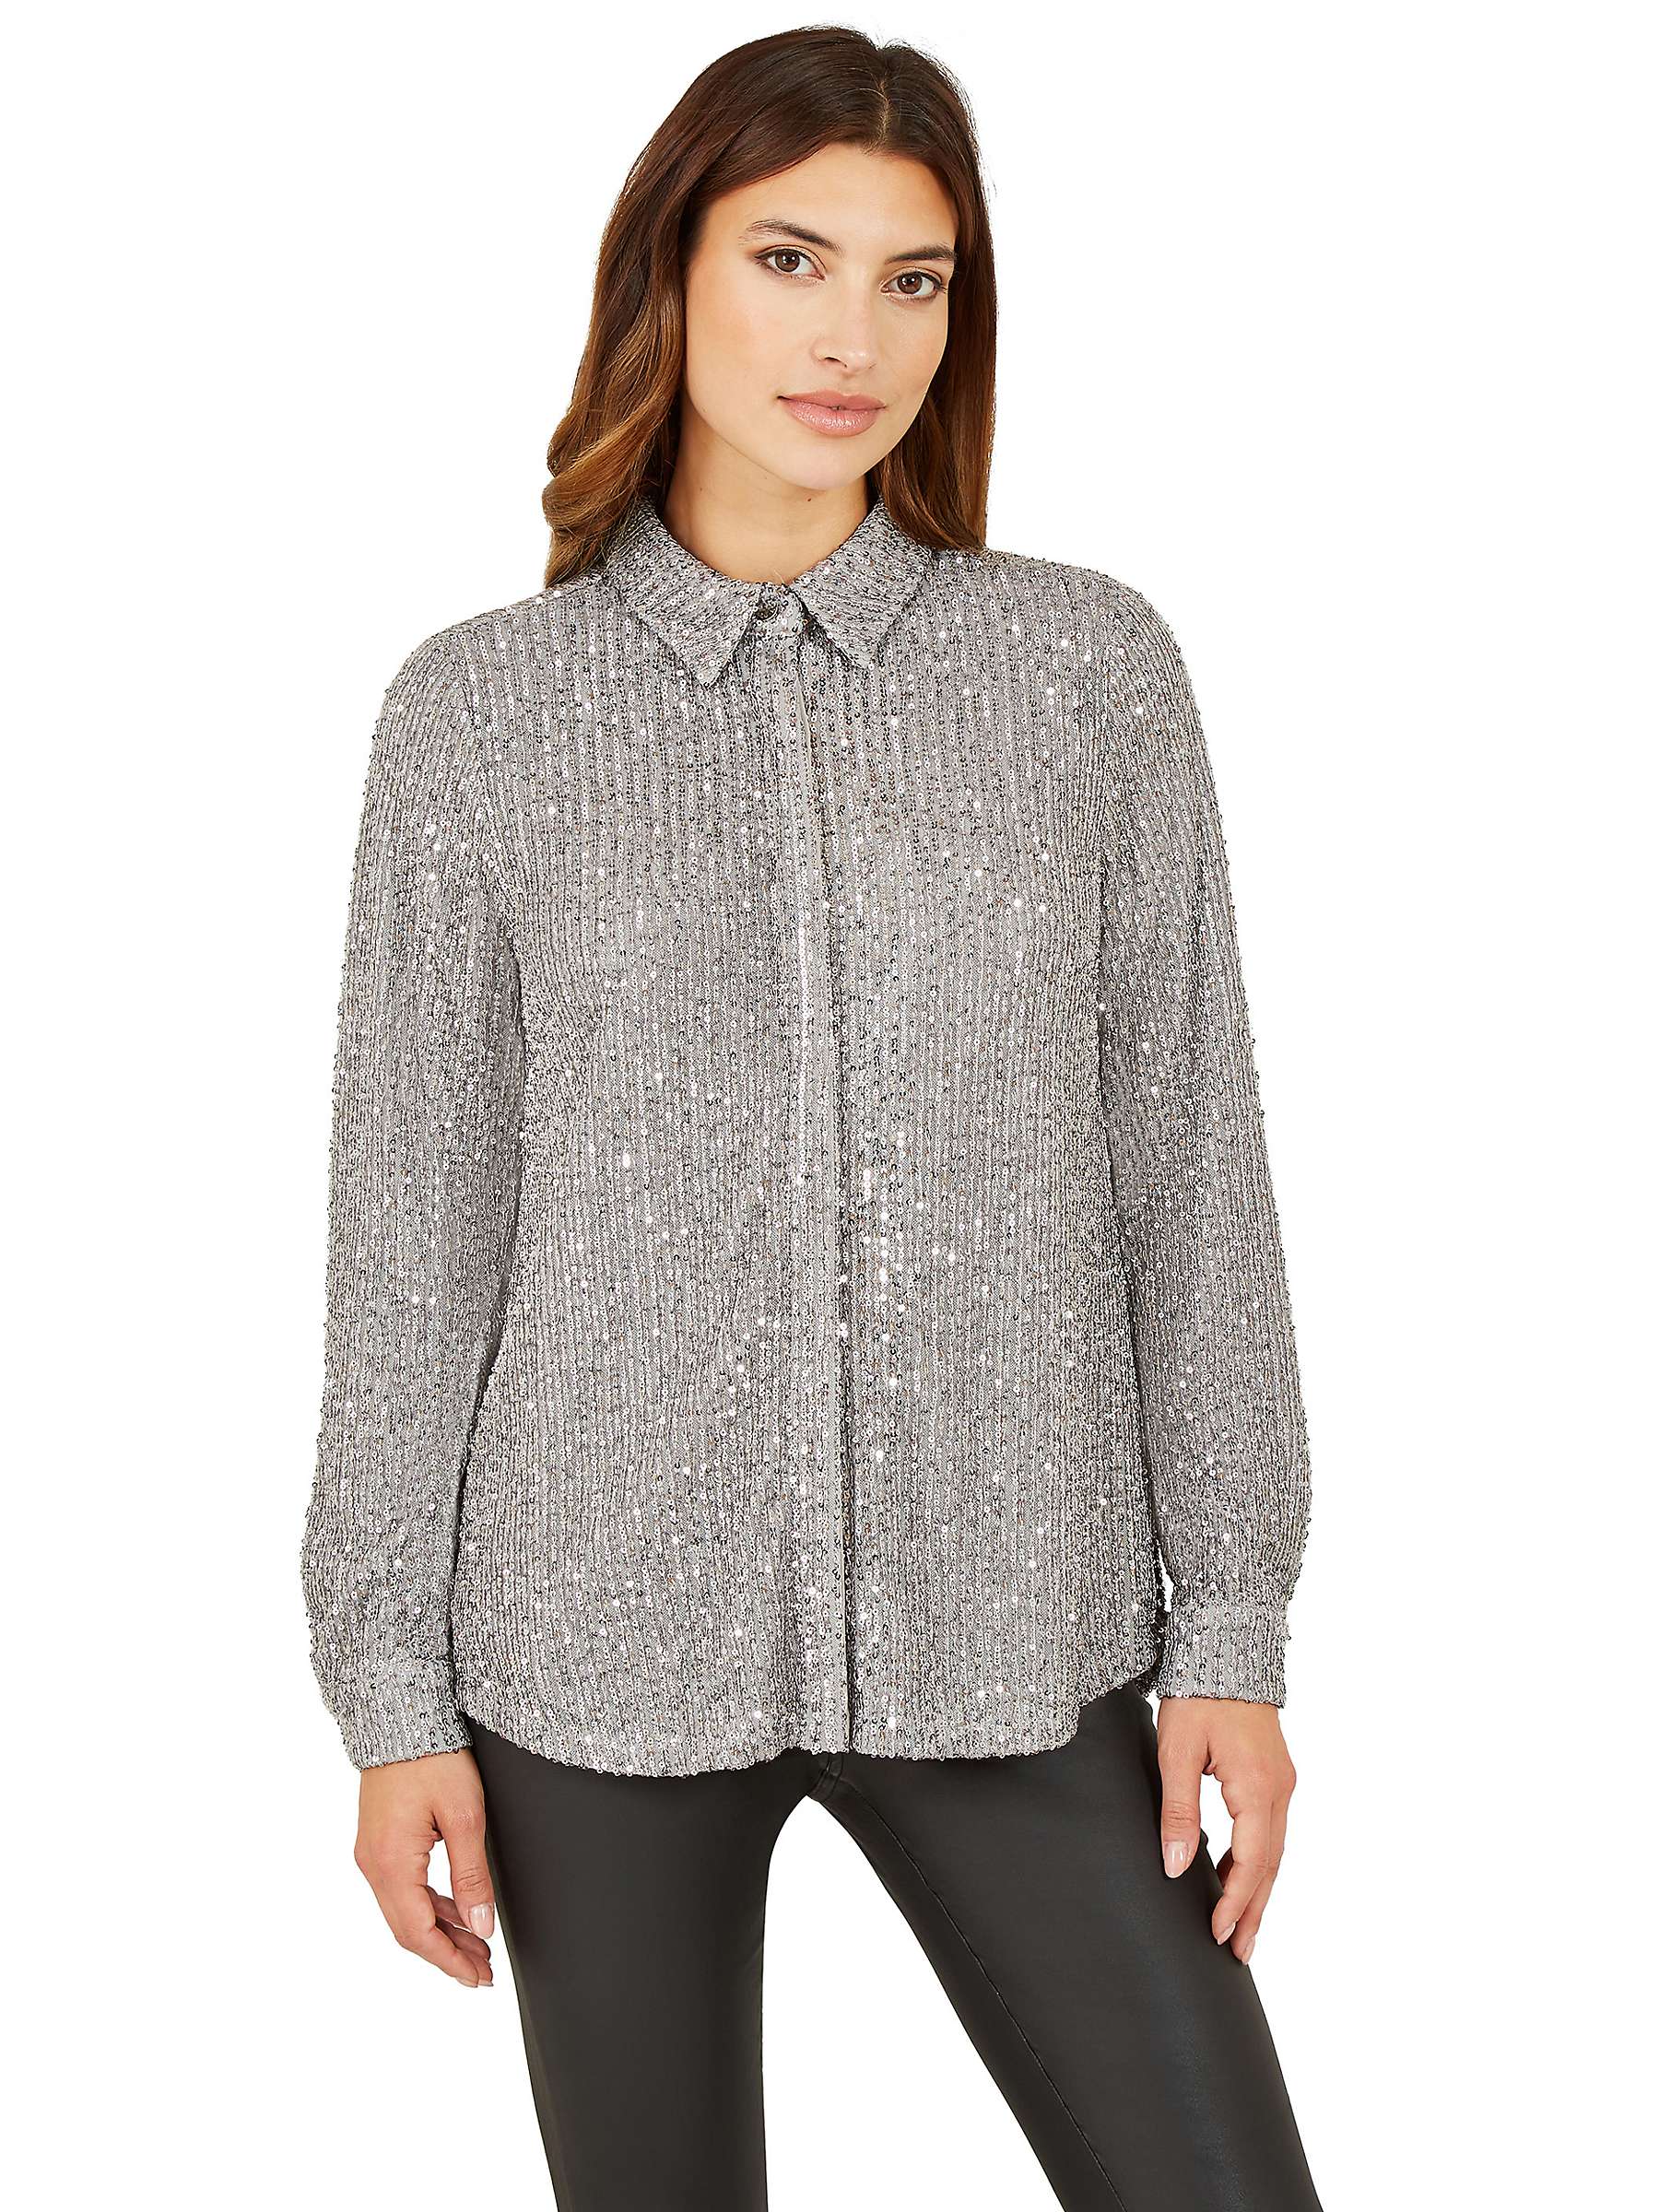 Buy Yumi Silver Sequin Shirt Online at johnlewis.com